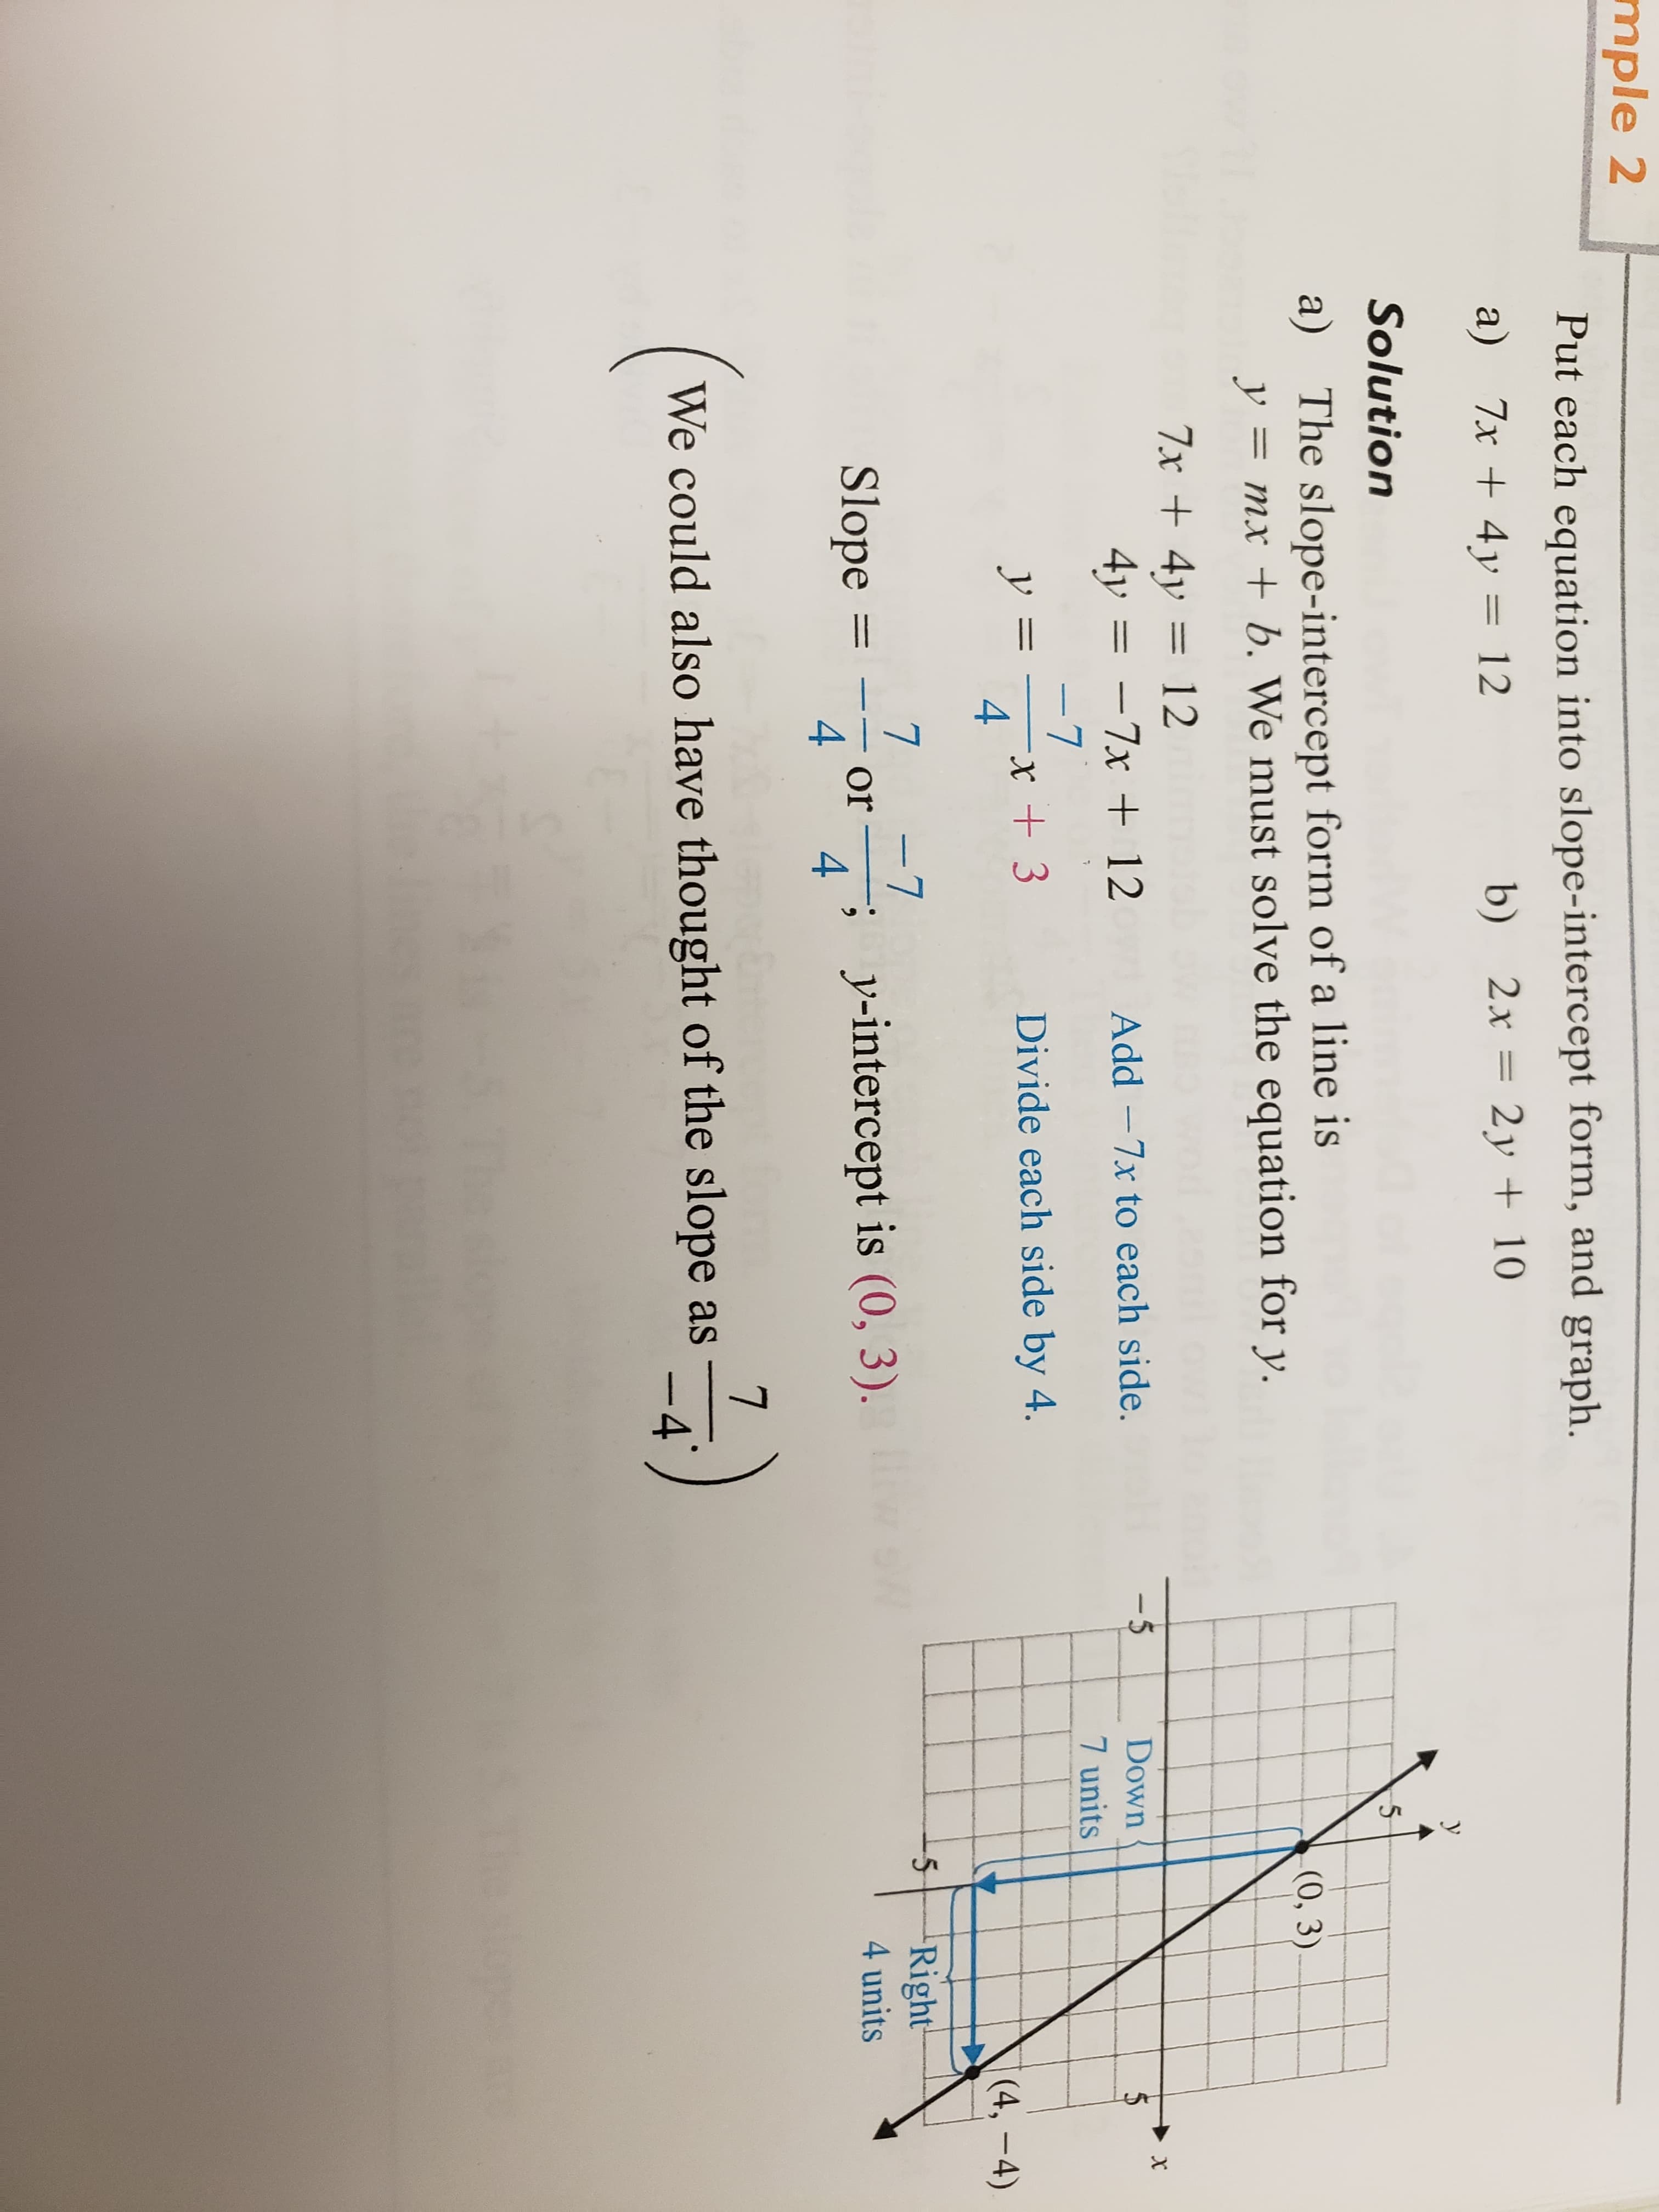 mple 2
Put each equation into slope-intercept form, and graph
a) 7x 4y 12
Solution
a) The slope-intercept form of a line is
b) 2x 2y 10
(0, 3
ymx
b. We must solve the equation for y.
4y7x 12 Add -7x to each side.
Down
7 units
+3
Divide each side by 4
4
Slope 7or vinteropt is 0.3)
Right
4 units
4
We could also have thought of the slope as
-4
